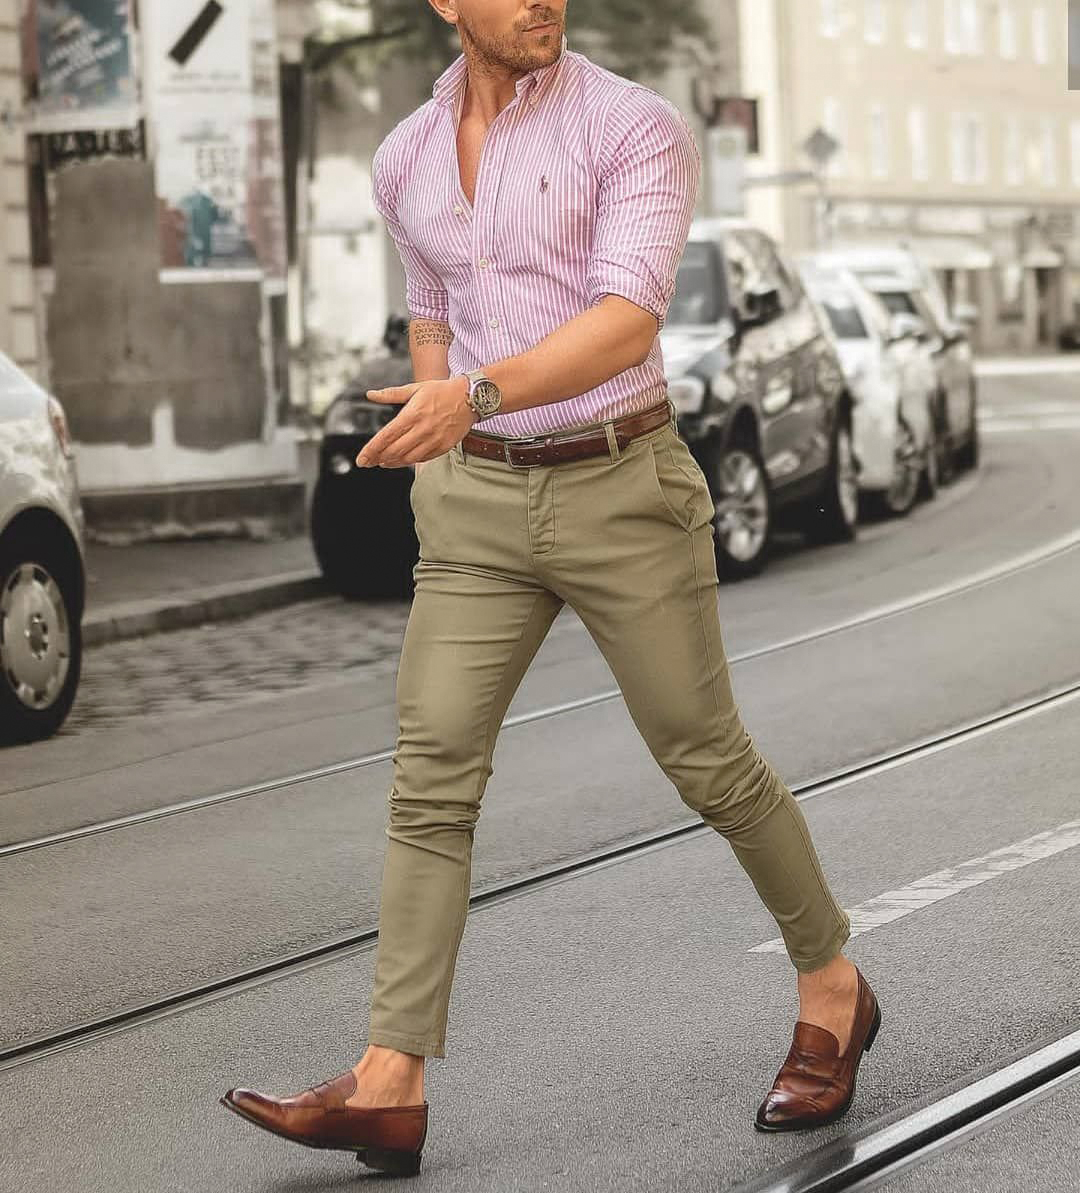 matching pink dress shirt with khaki pants and brown loafers